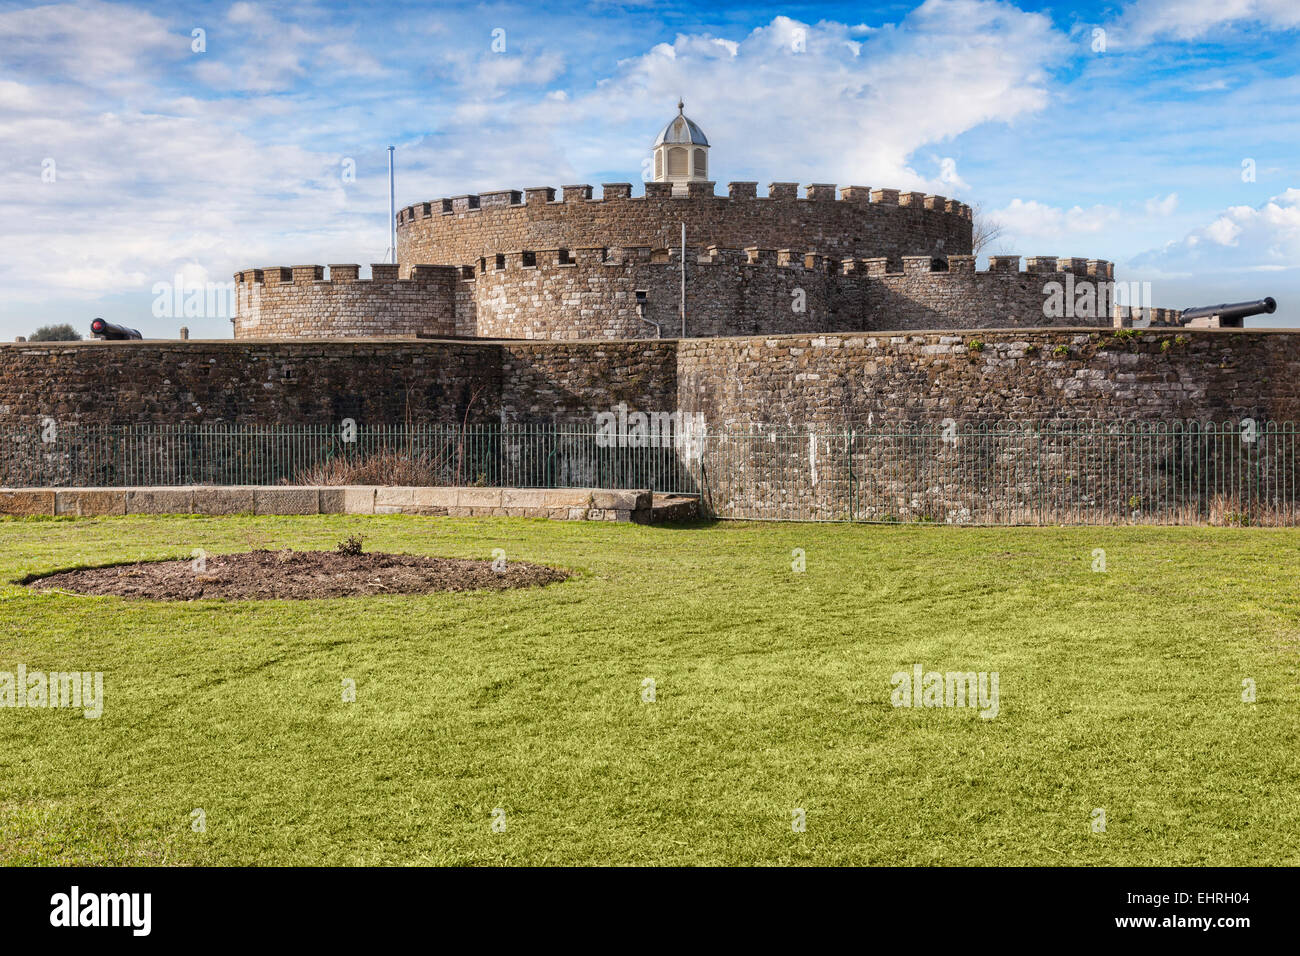 Deal Castle, Kent, England, UK, was built on the orders of Henry VIII and opened in 1540. Stock Photo